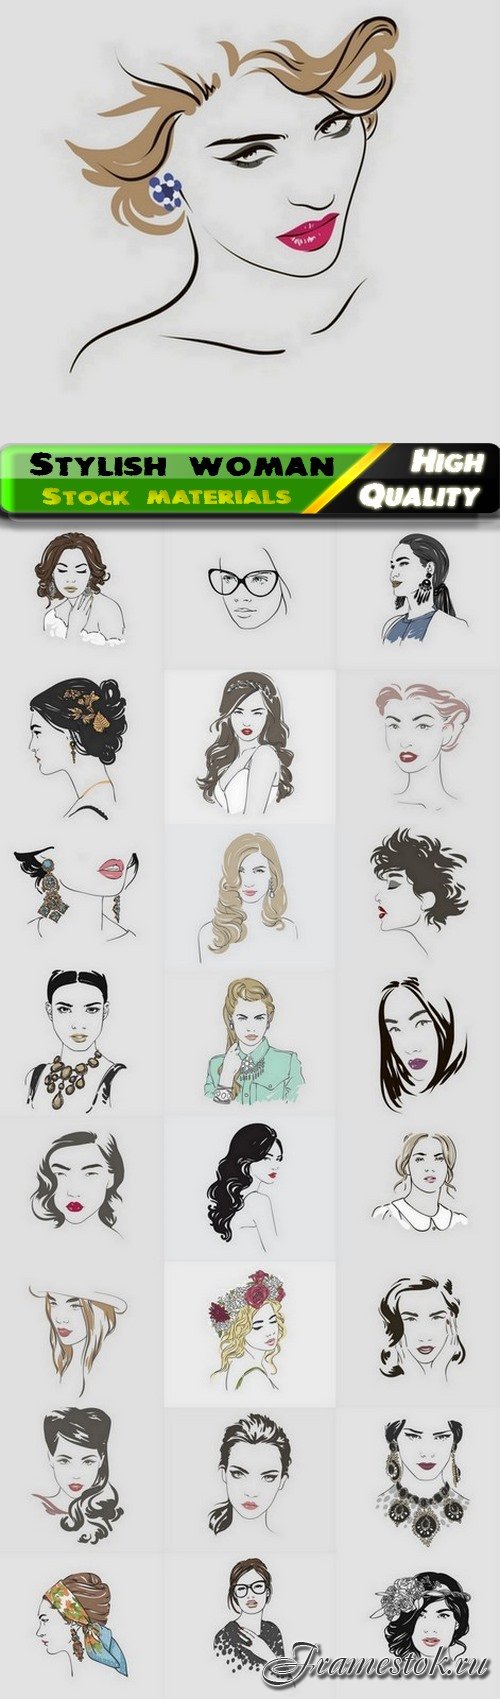 Portrait sketch fashion of stylish woman and girl - 25 Eps